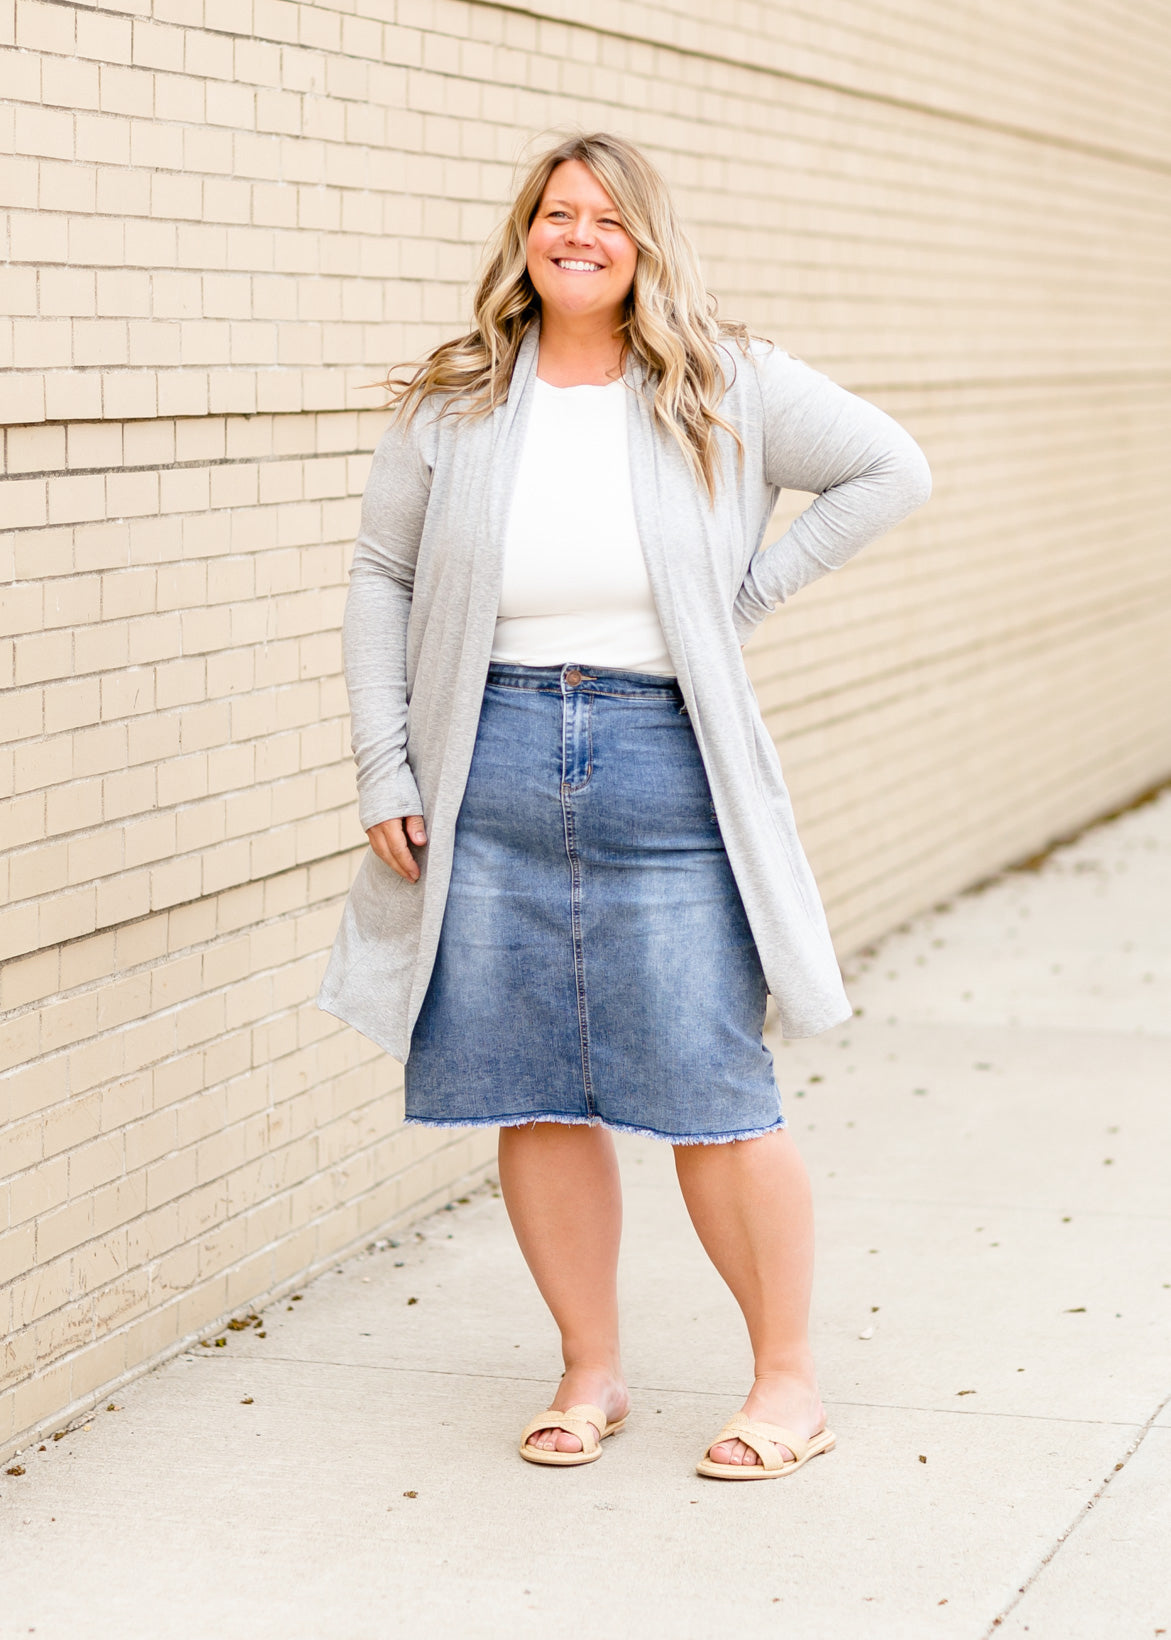 Summer casual work outfits ideas for plus size 51  Plus size summer  fashion, Plus size fashion, Plus size outfits